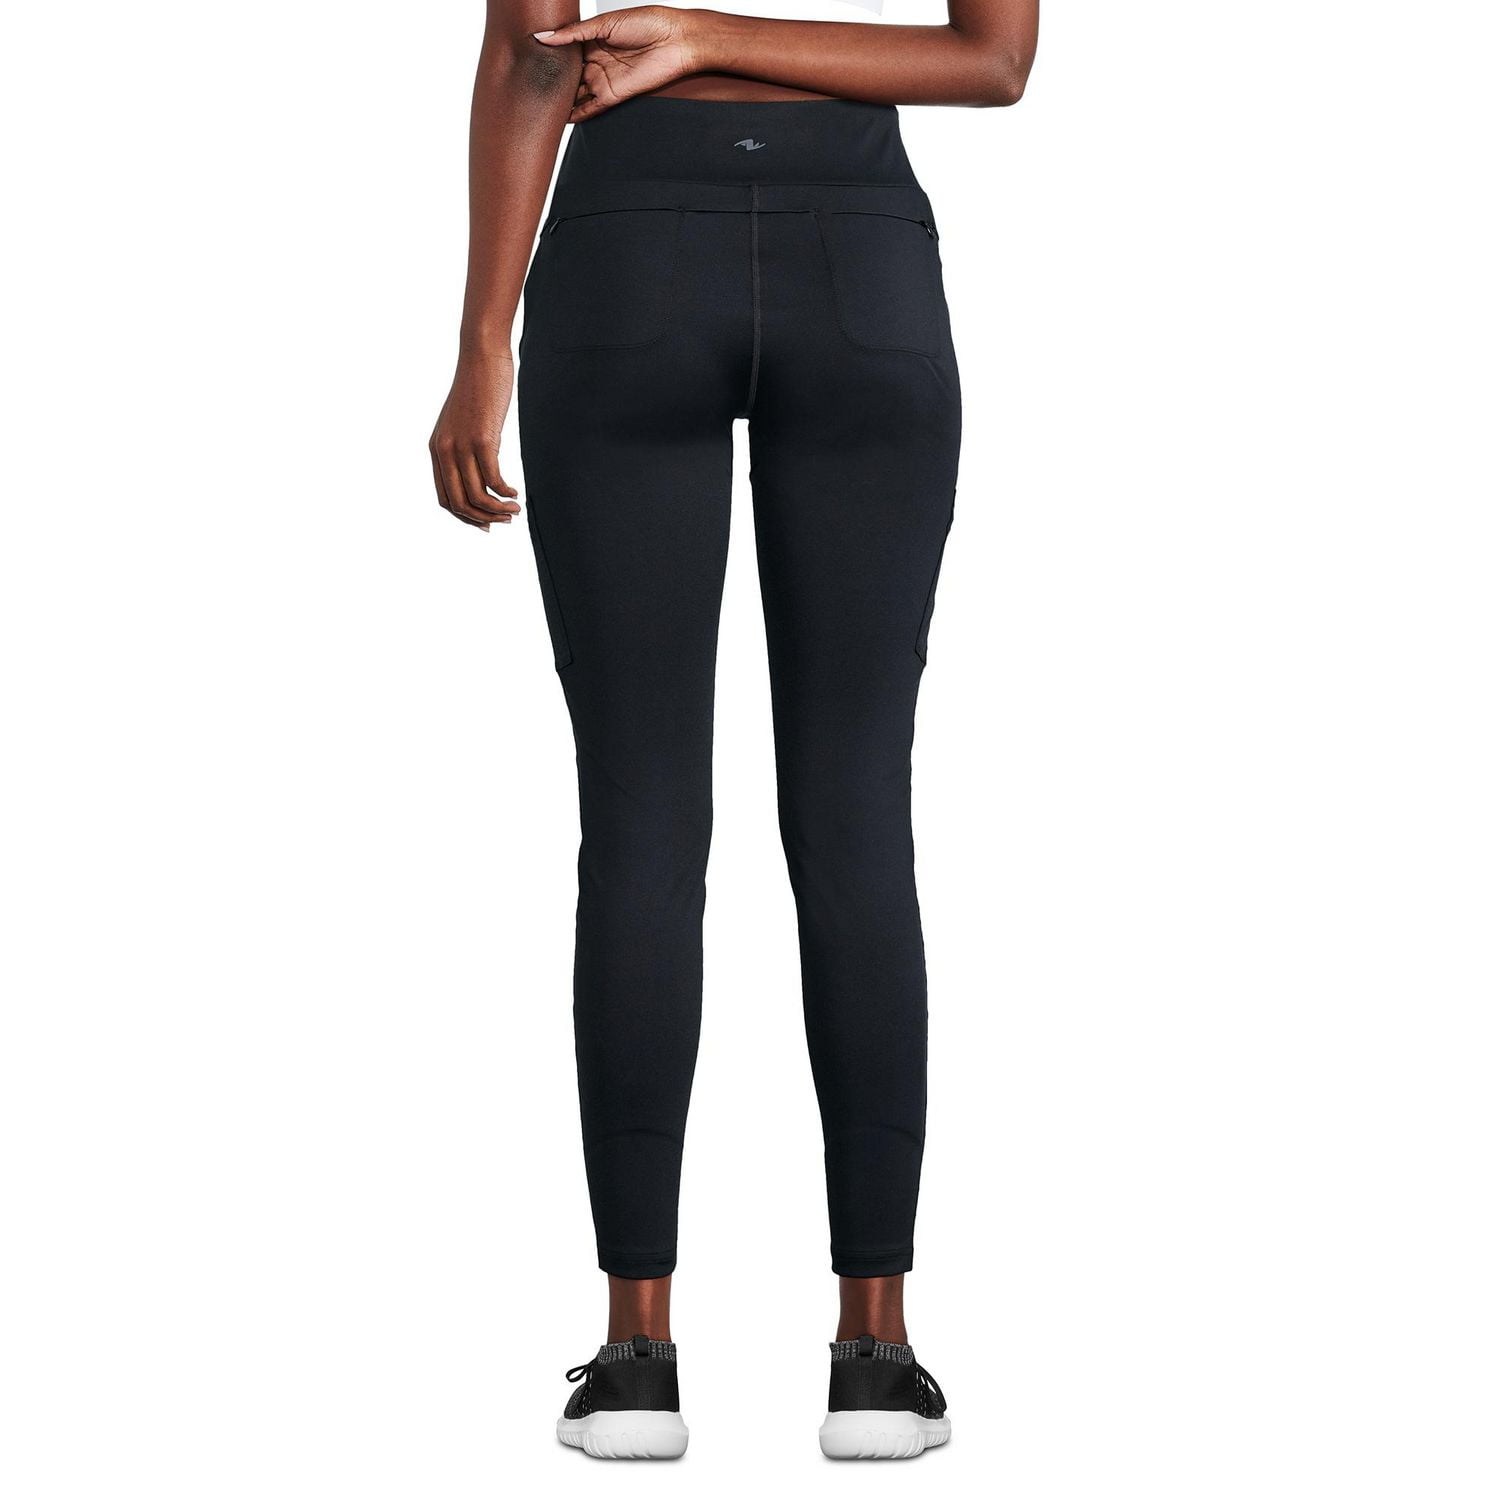 Athletic Works Breathable Athletic Pants for Women